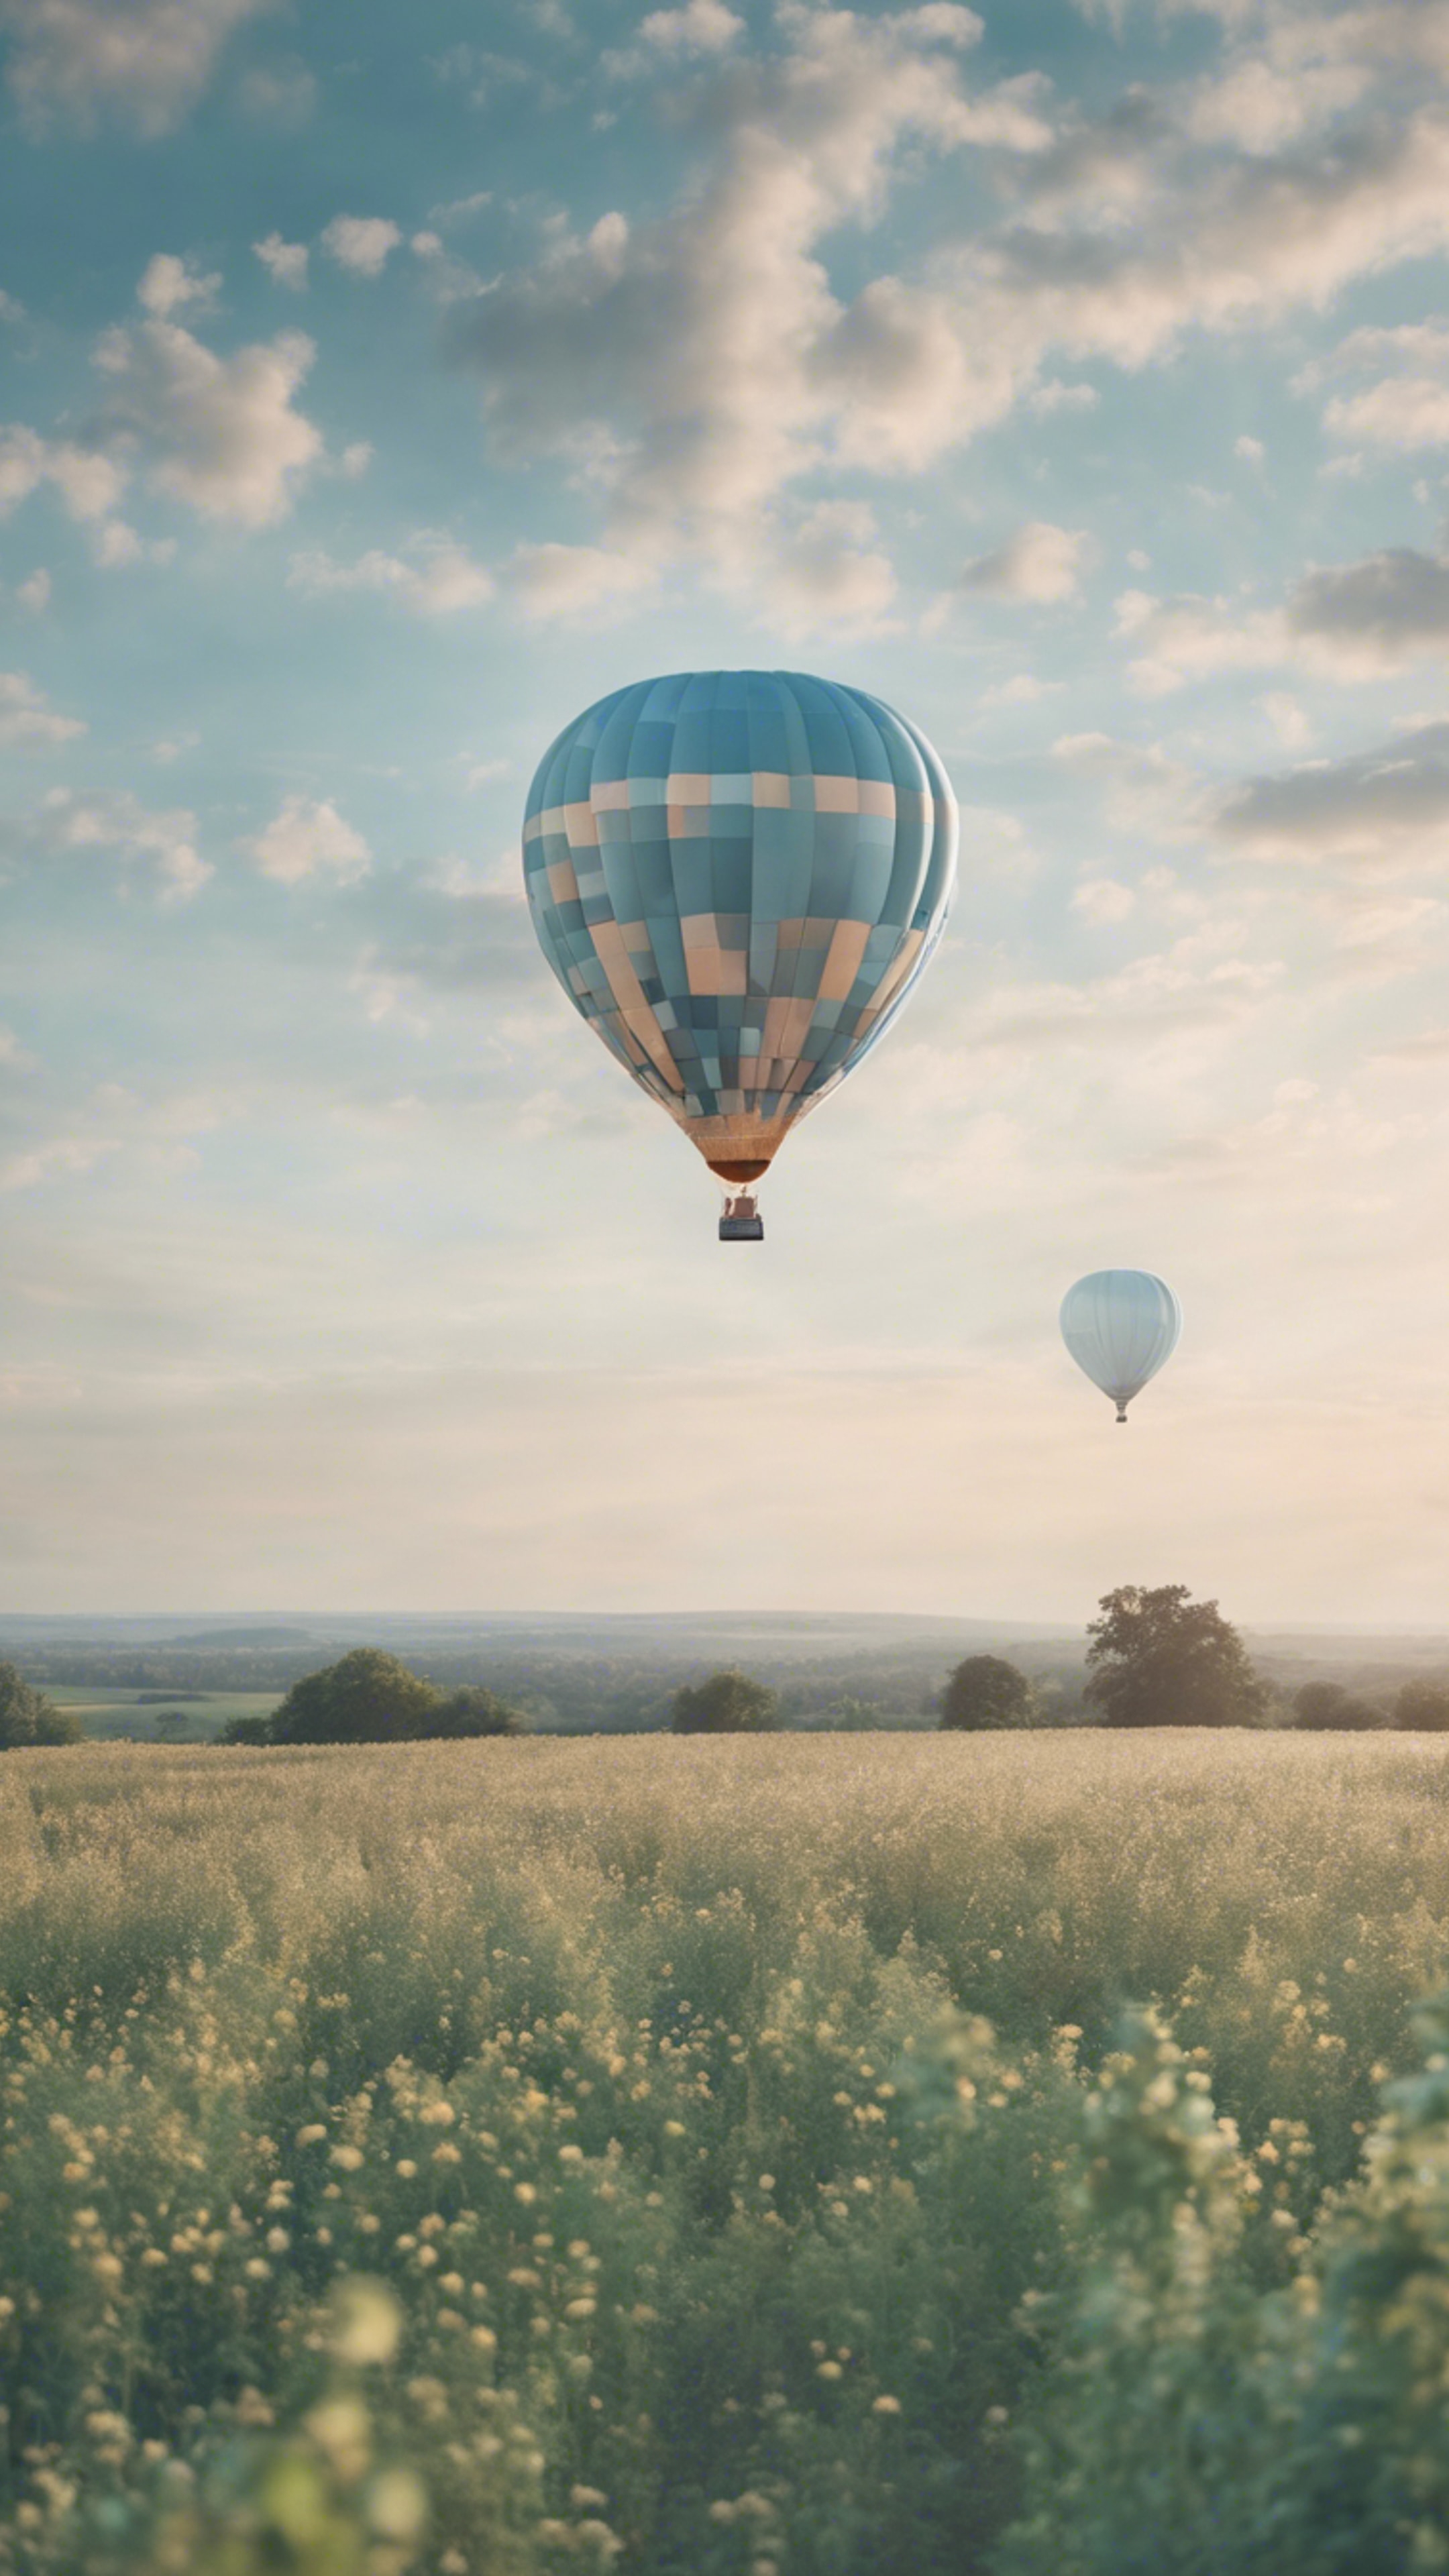 A pastel blue hot air balloon floating serenely above a patchwork field. Tapet[b19c340976c044f4b3c6]